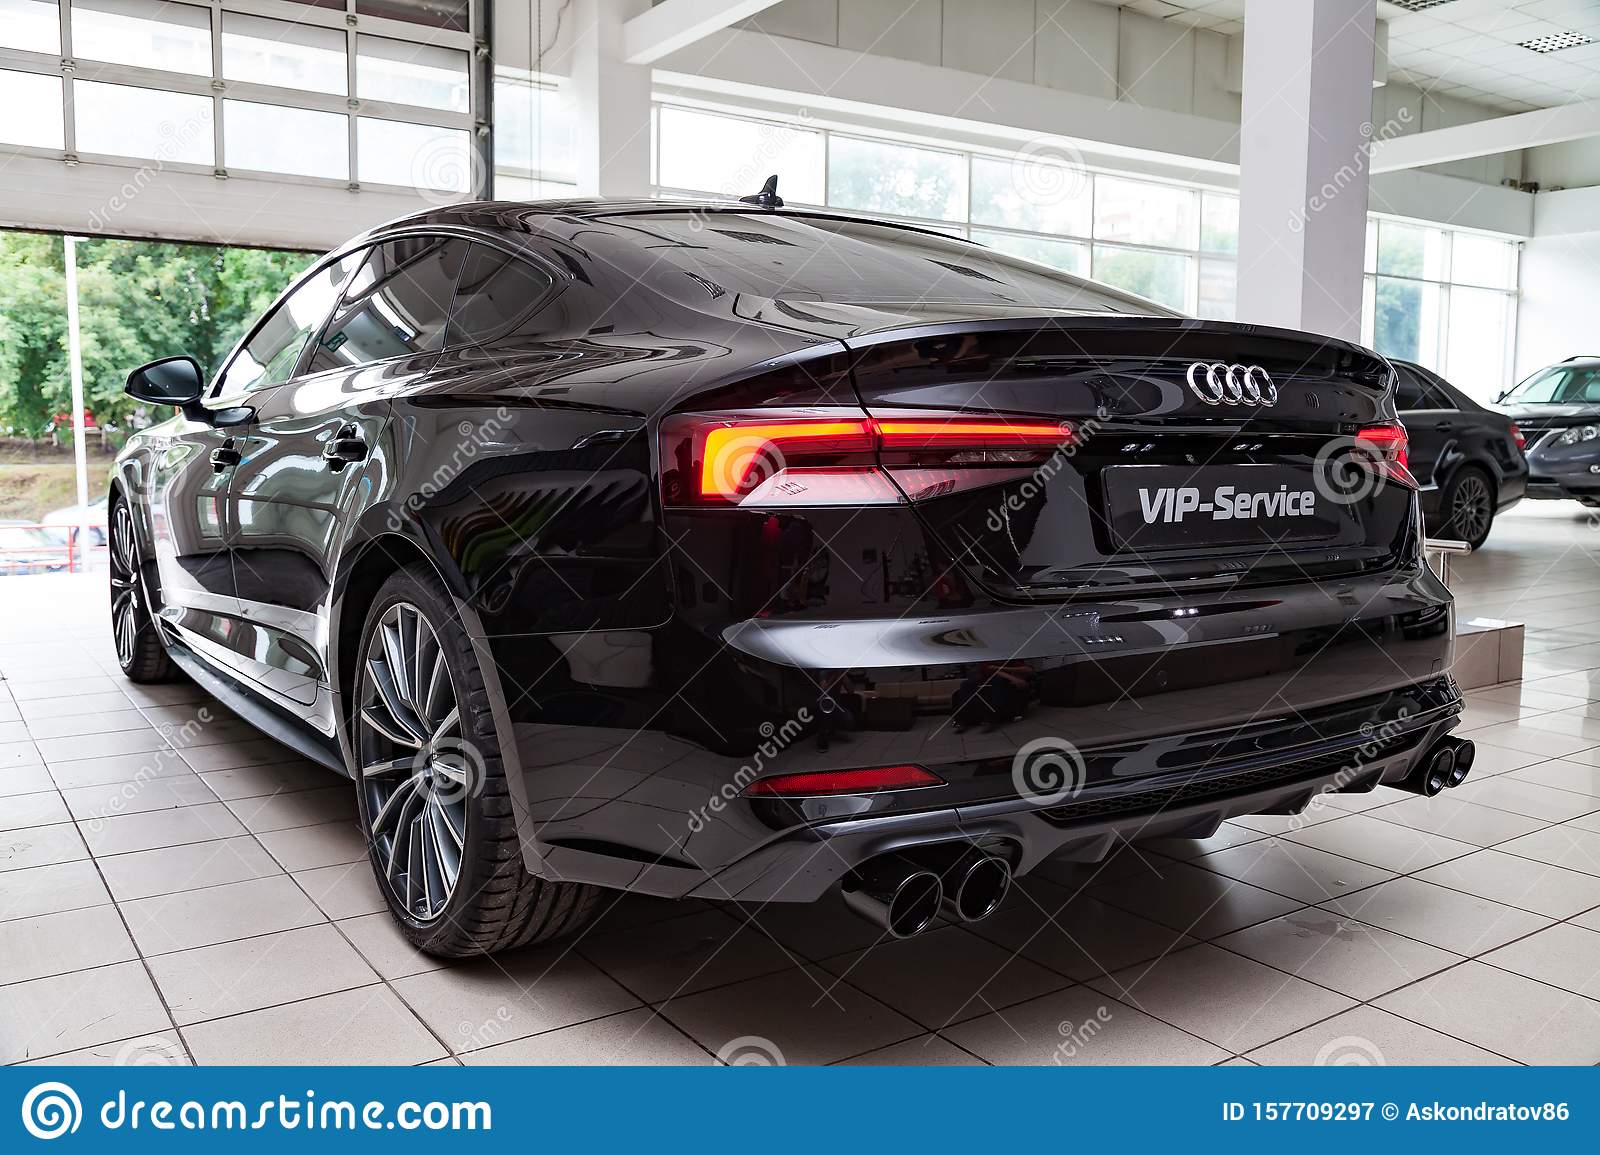 Rear View of the 2019 Audi A5 Sportback Prepared for Sale and Exhibited in  the Showroom with a Polished Shiny Black Body Editorial Photography - Image  of coupe, german: 157709297